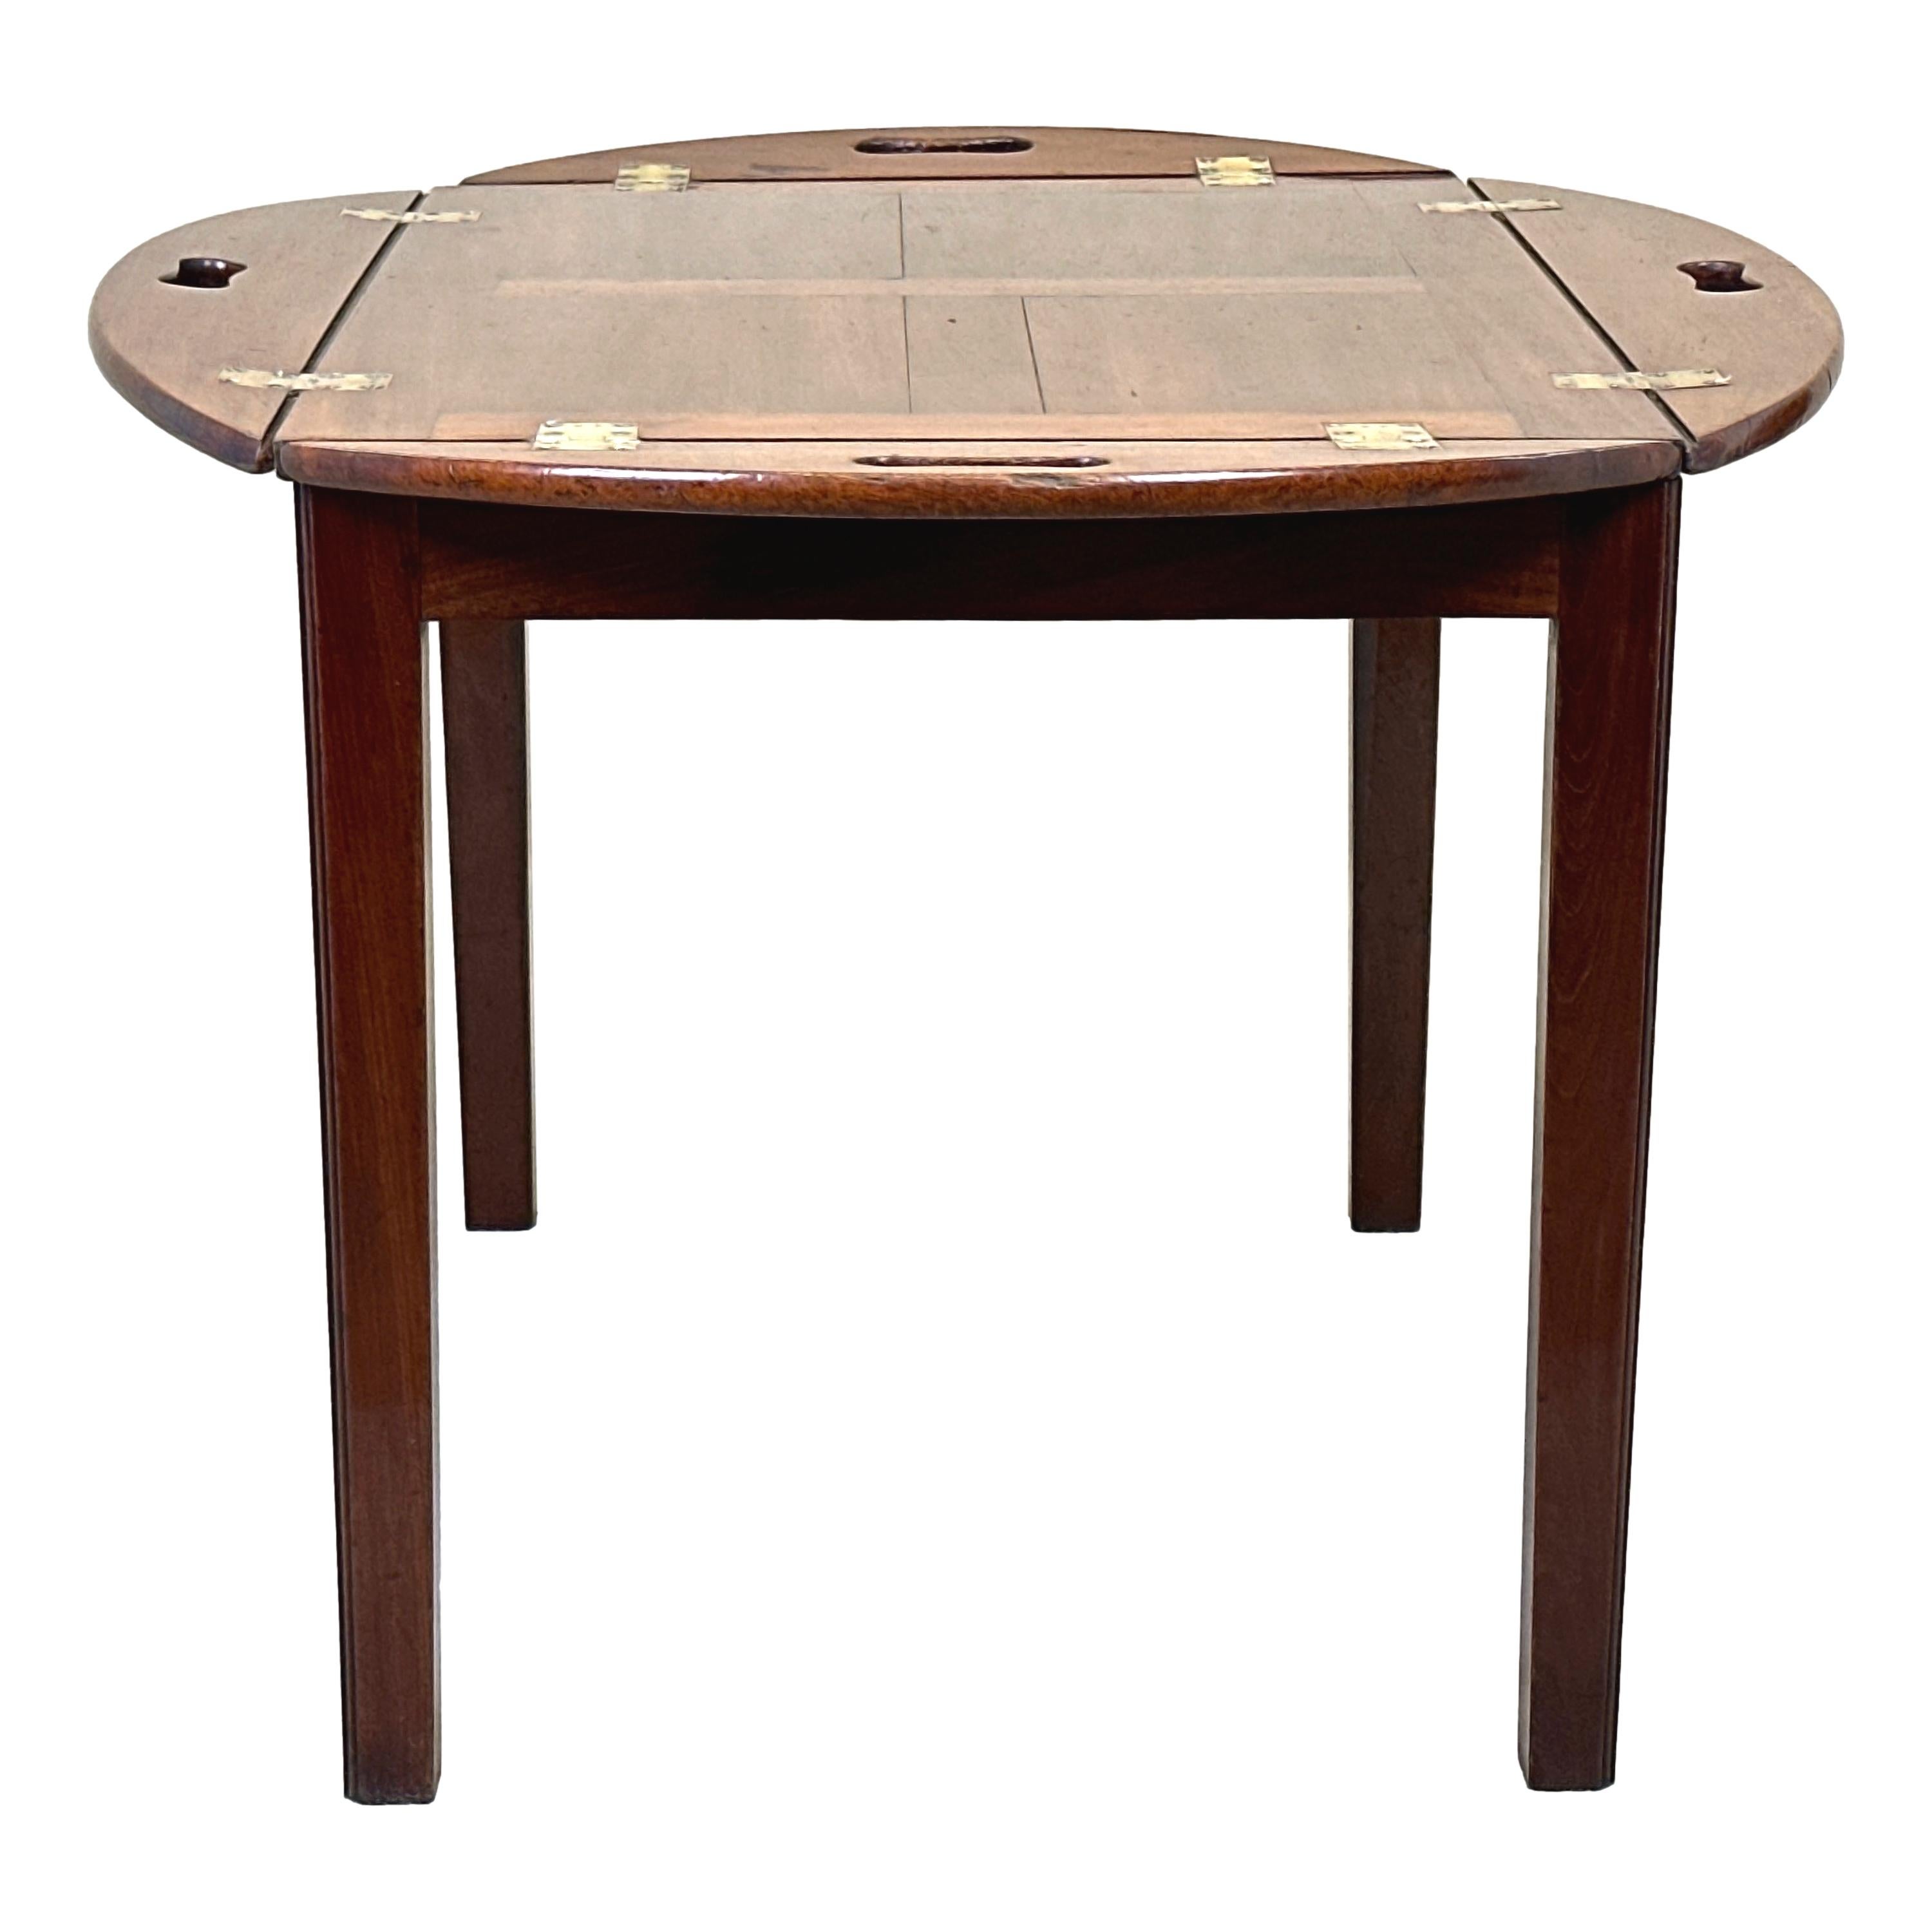 A very good quality late 18th century, Georgian period, mahogany oval butlers tray of Panelled design, retaining original brass hinges to folding sides with pierced carrying handles, raised on later square leg mahogany stand.


During the 18th